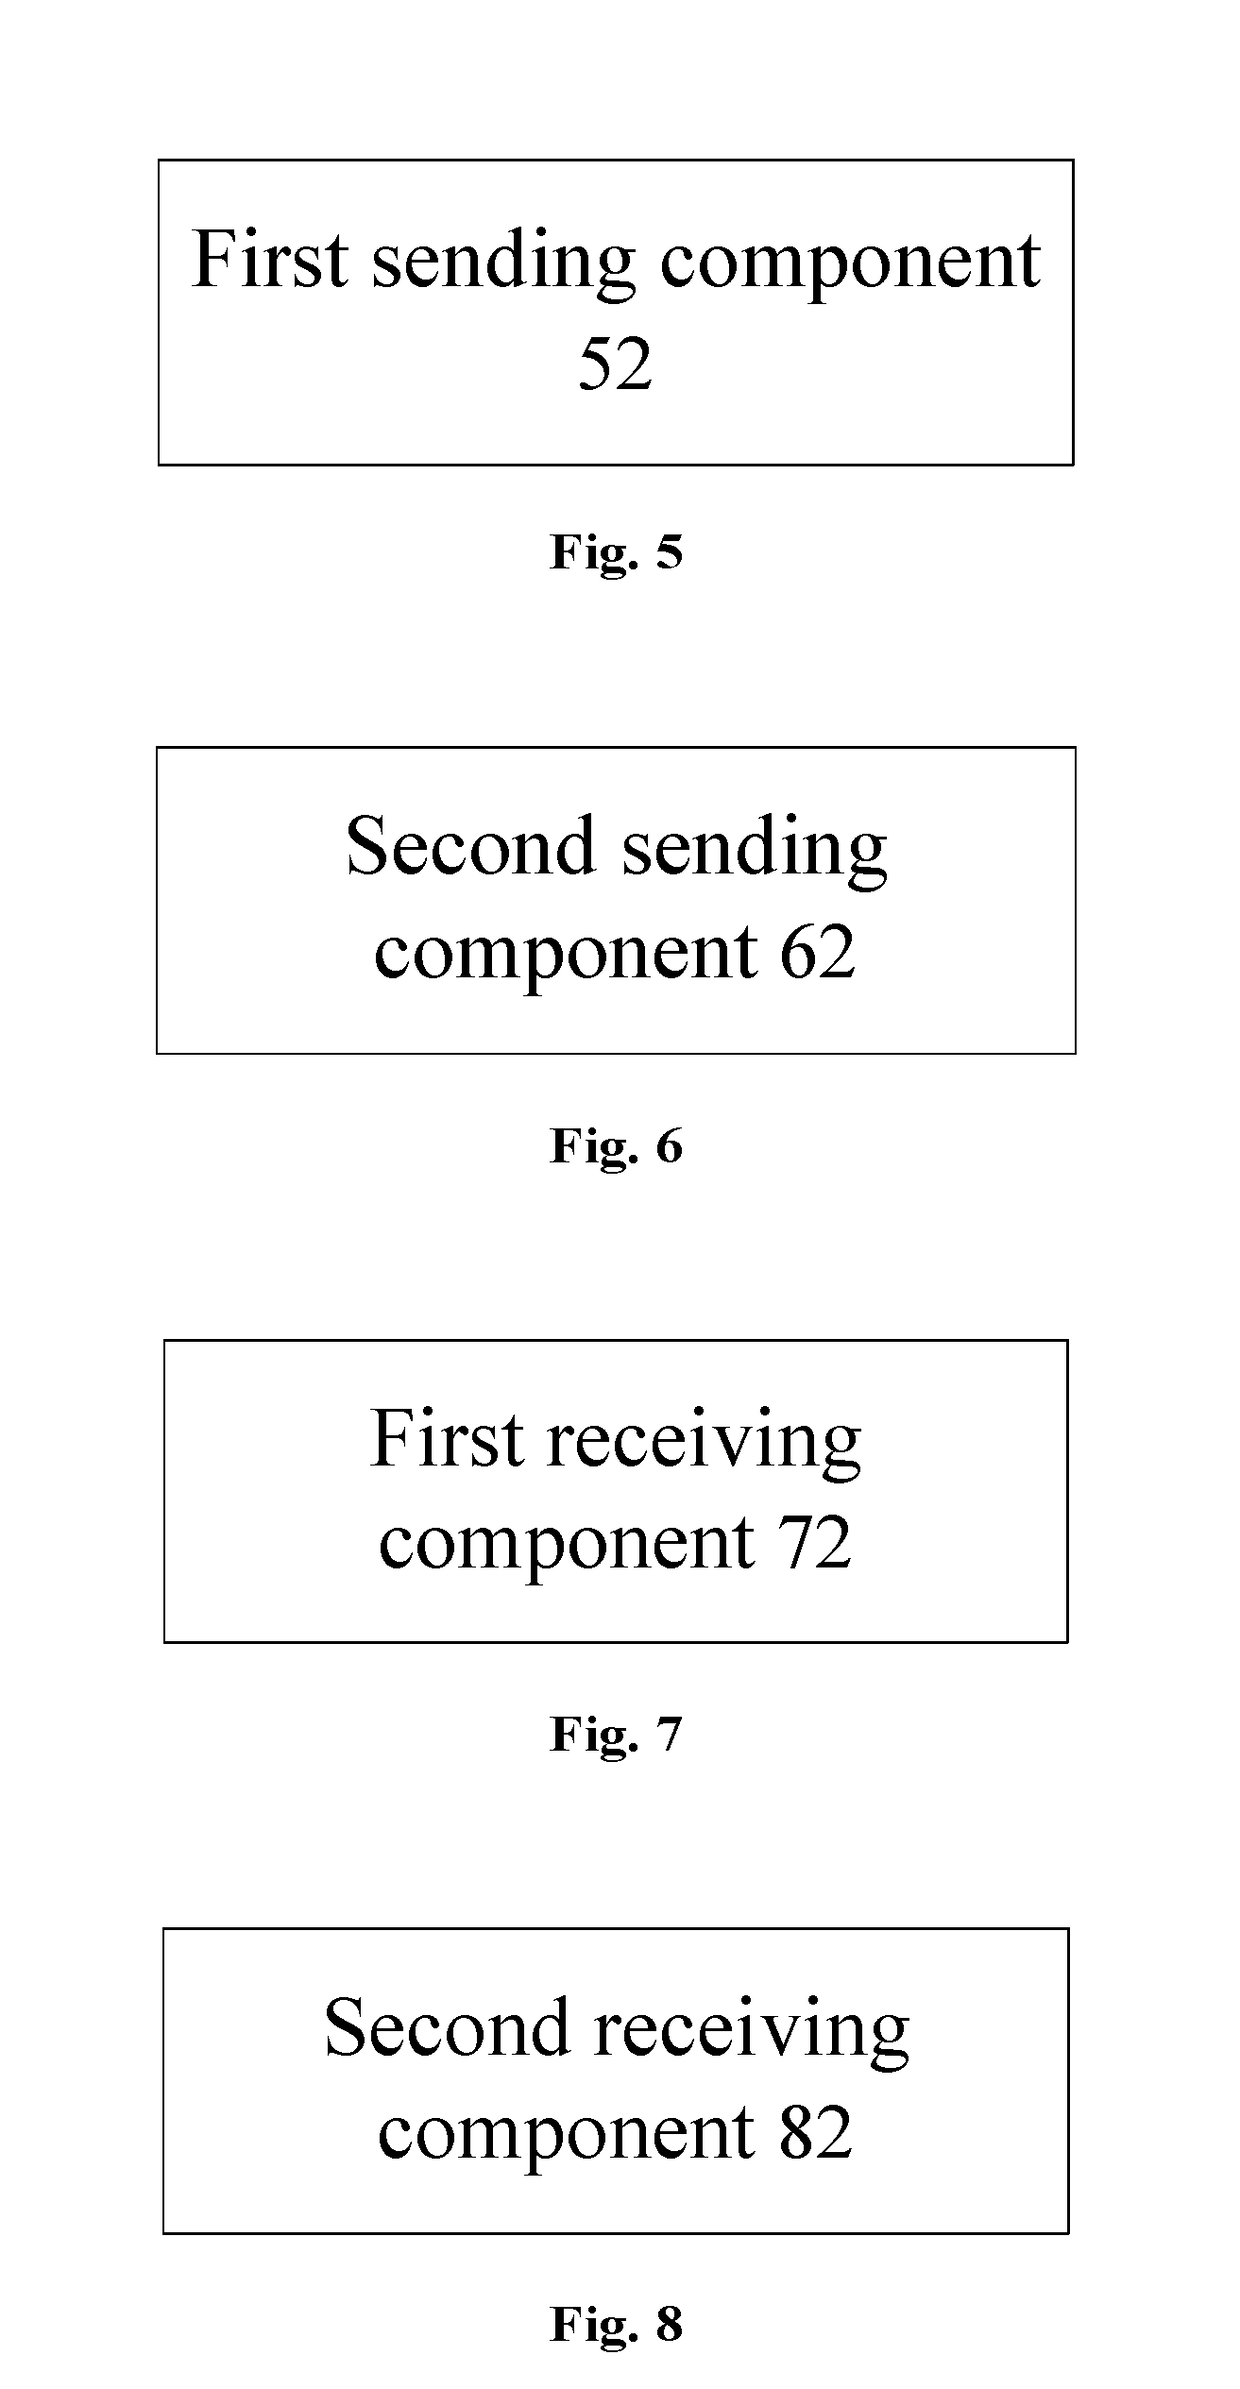 Method and device for notifying and determining dmrs ports or mapping relationship